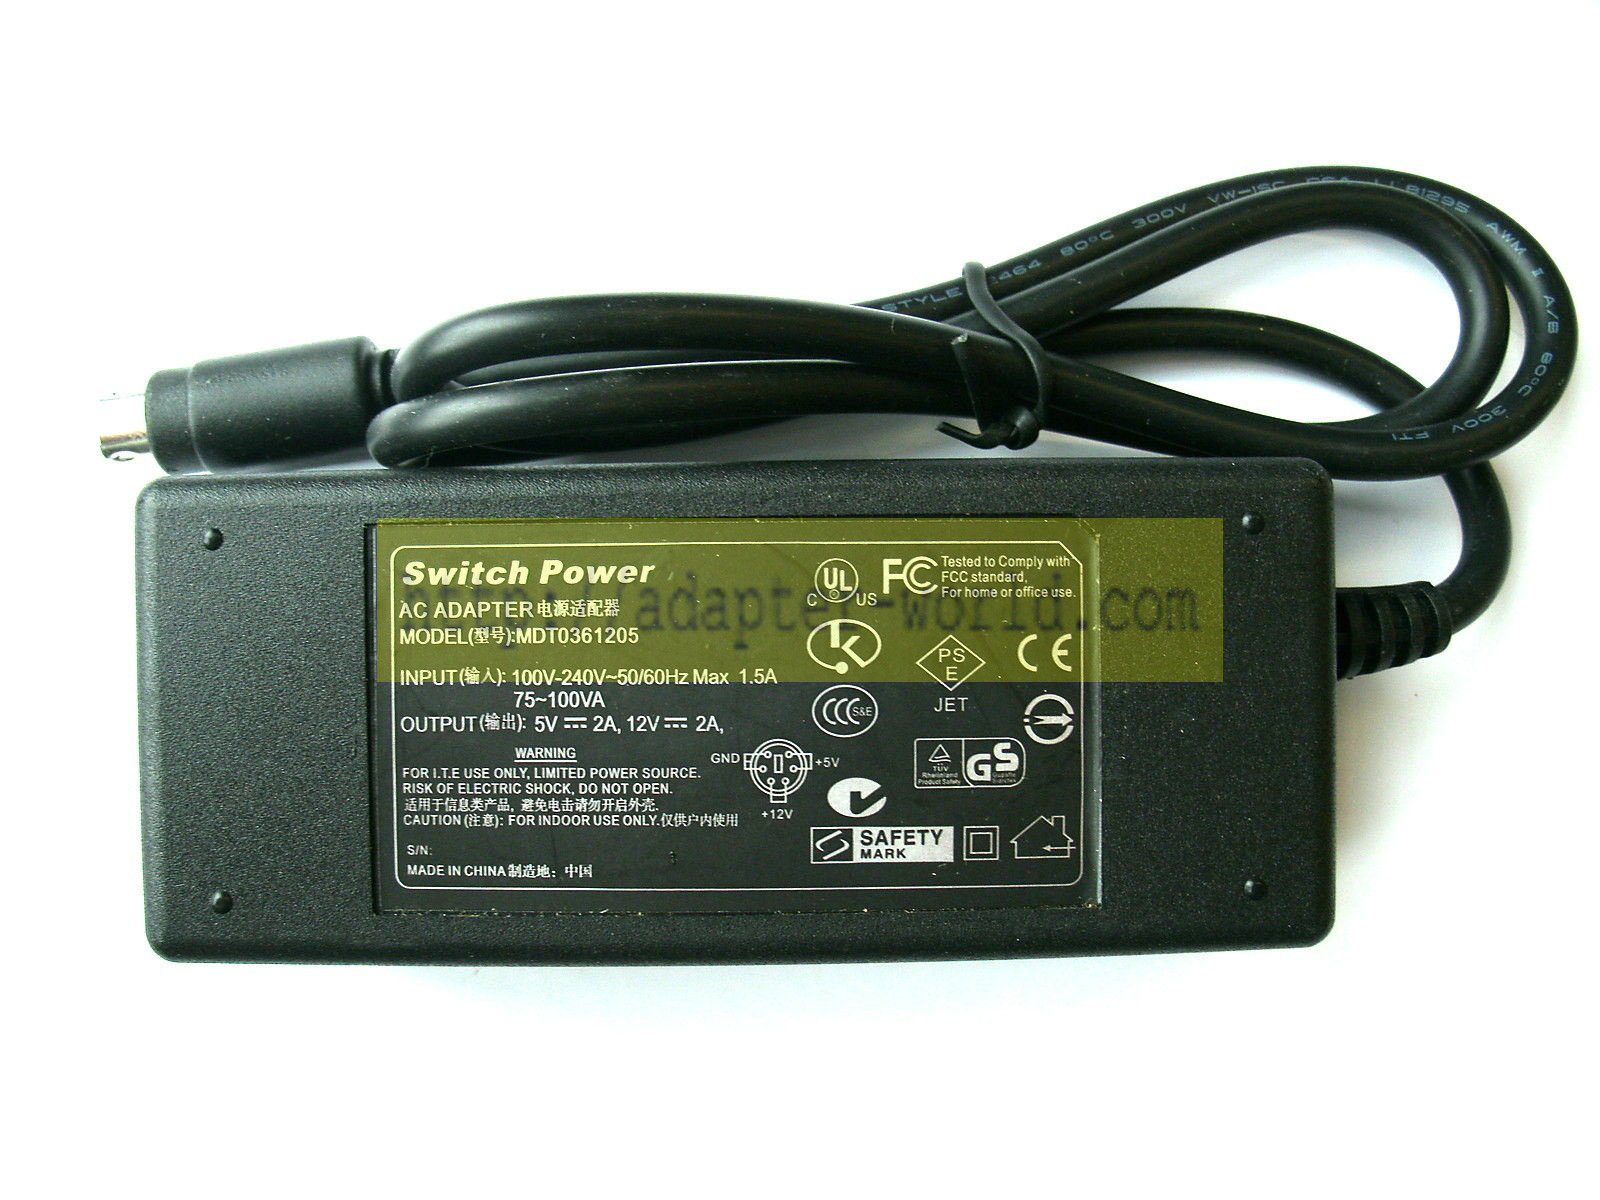 *Brand NEW*SWITCH POWER MDTO361205 5V 2A 12V 2A AC ADAPTER FOR EXTERNAL HARD DRIVE 6 PIN